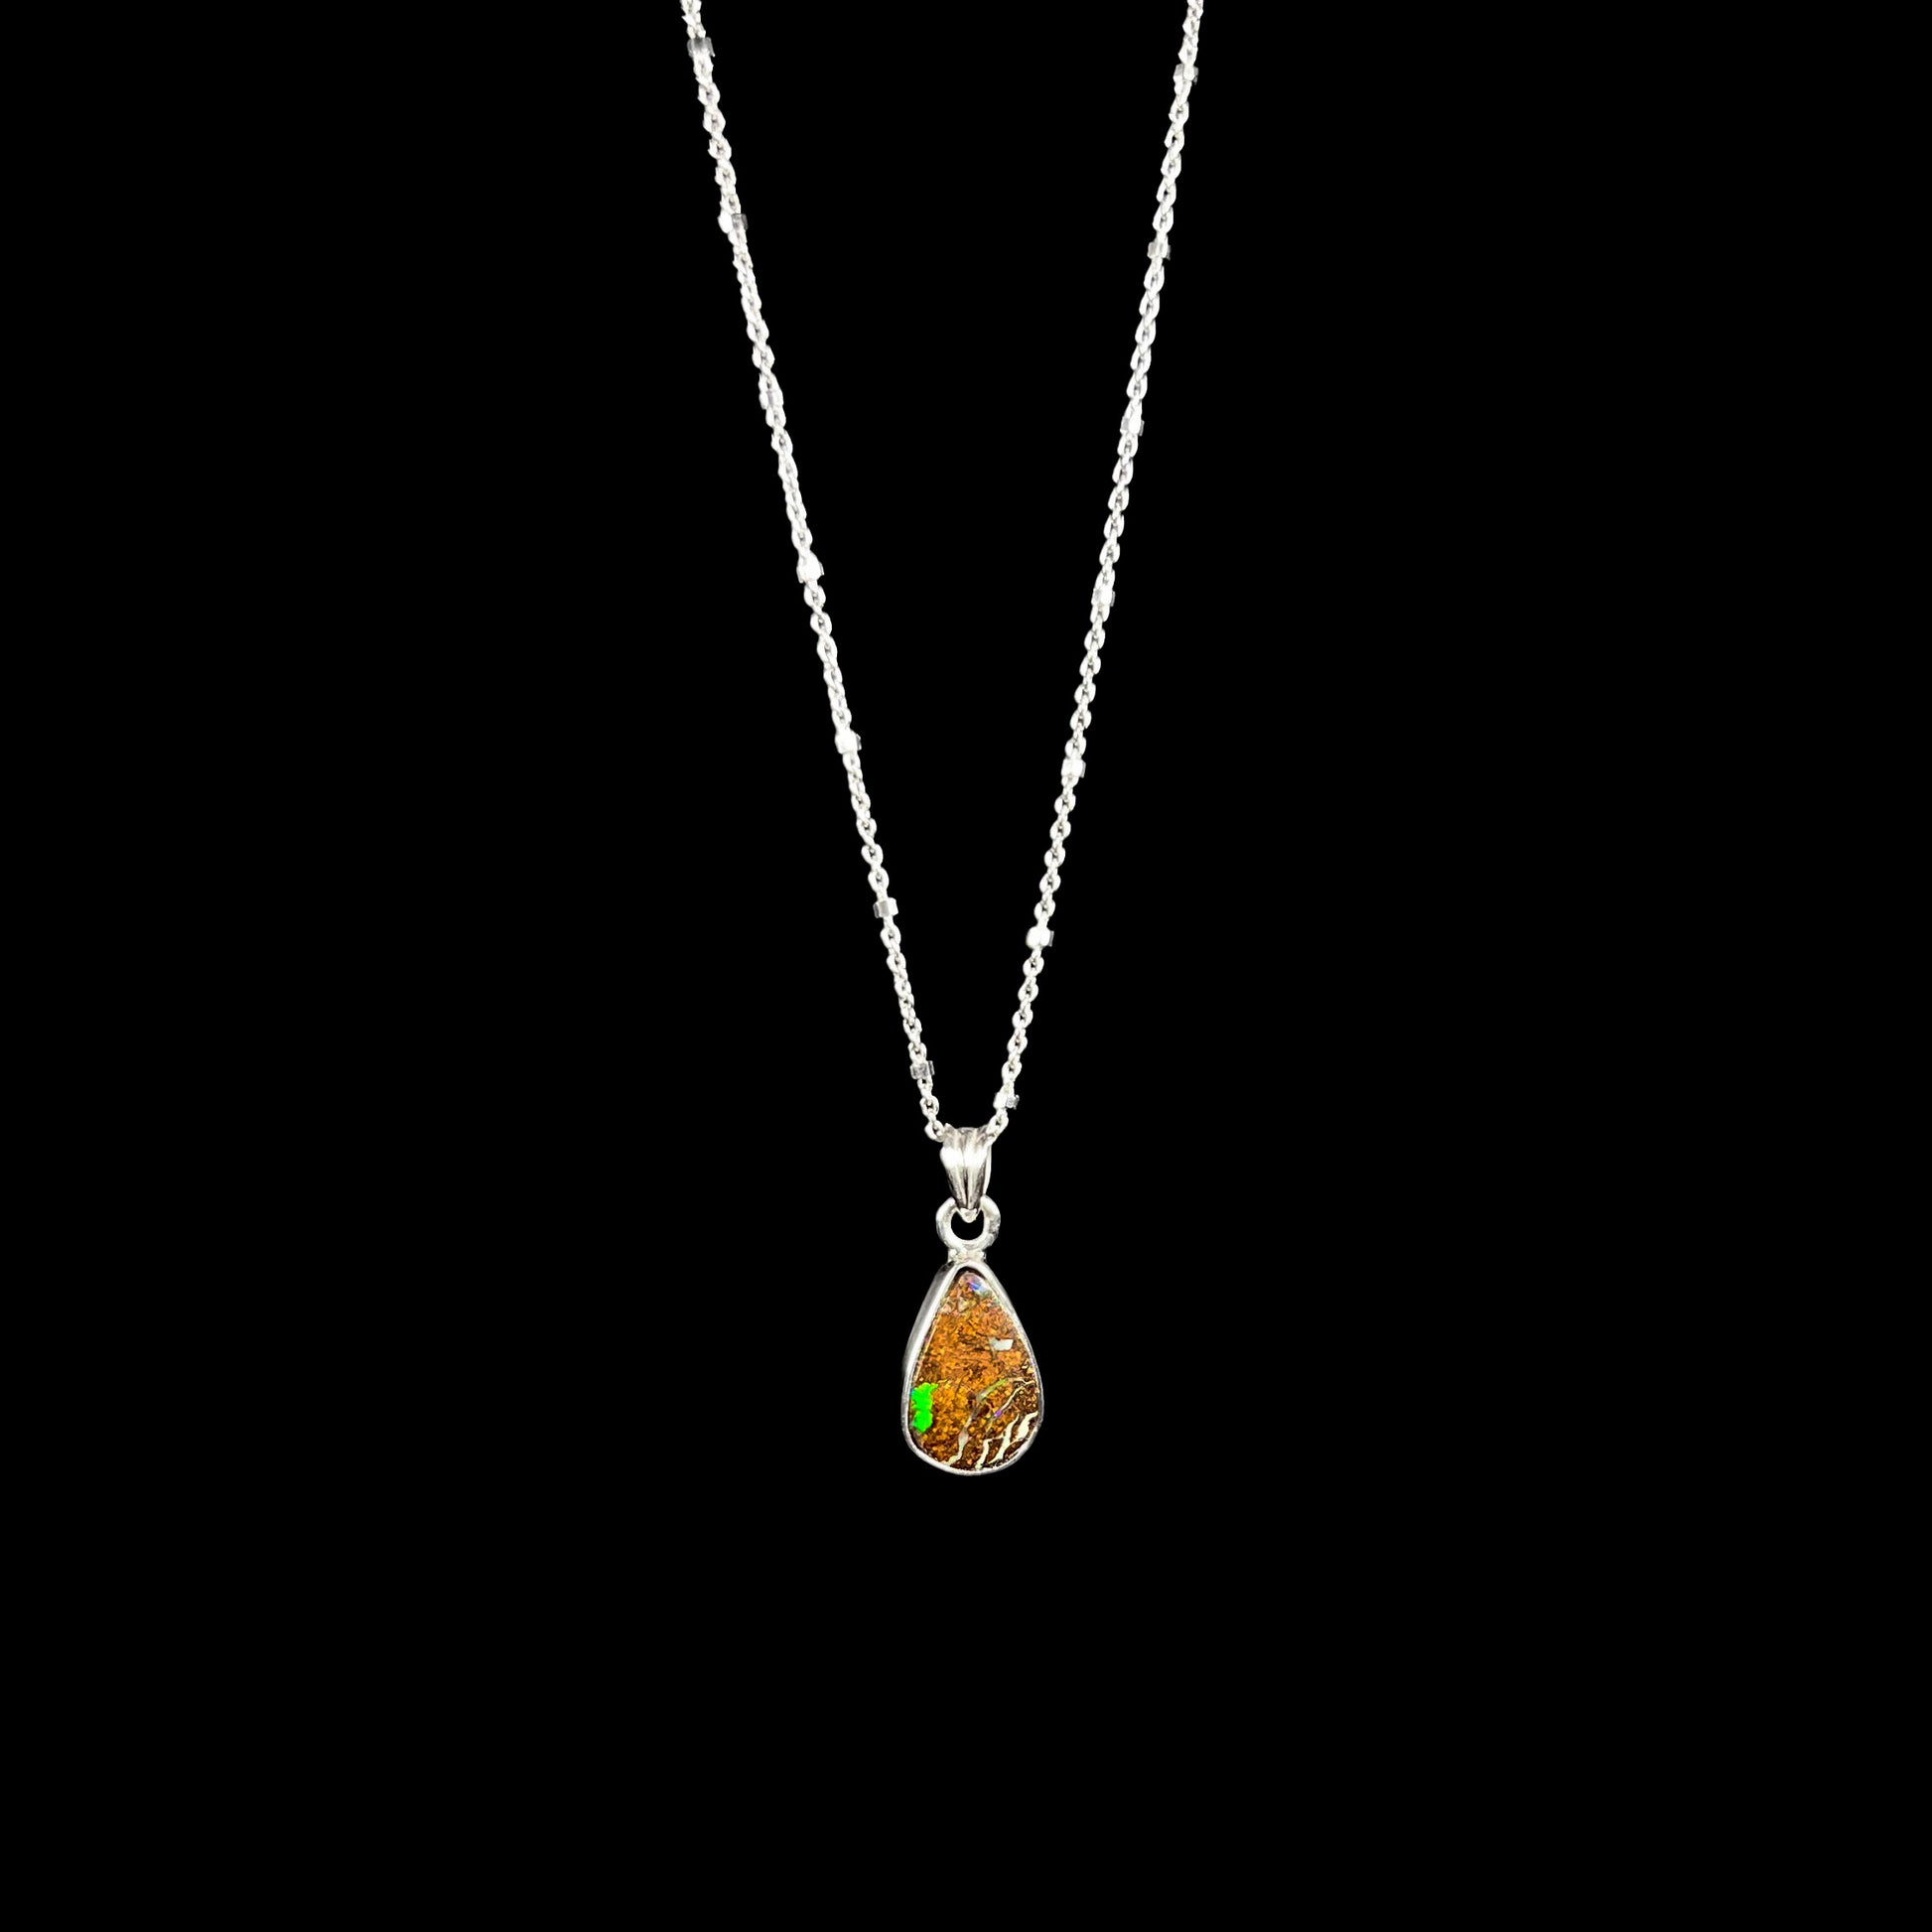 A sterling silver necklace bezel set with a natural Australian boulder opal stone.  The stone is brown with bright green and blue flashes.